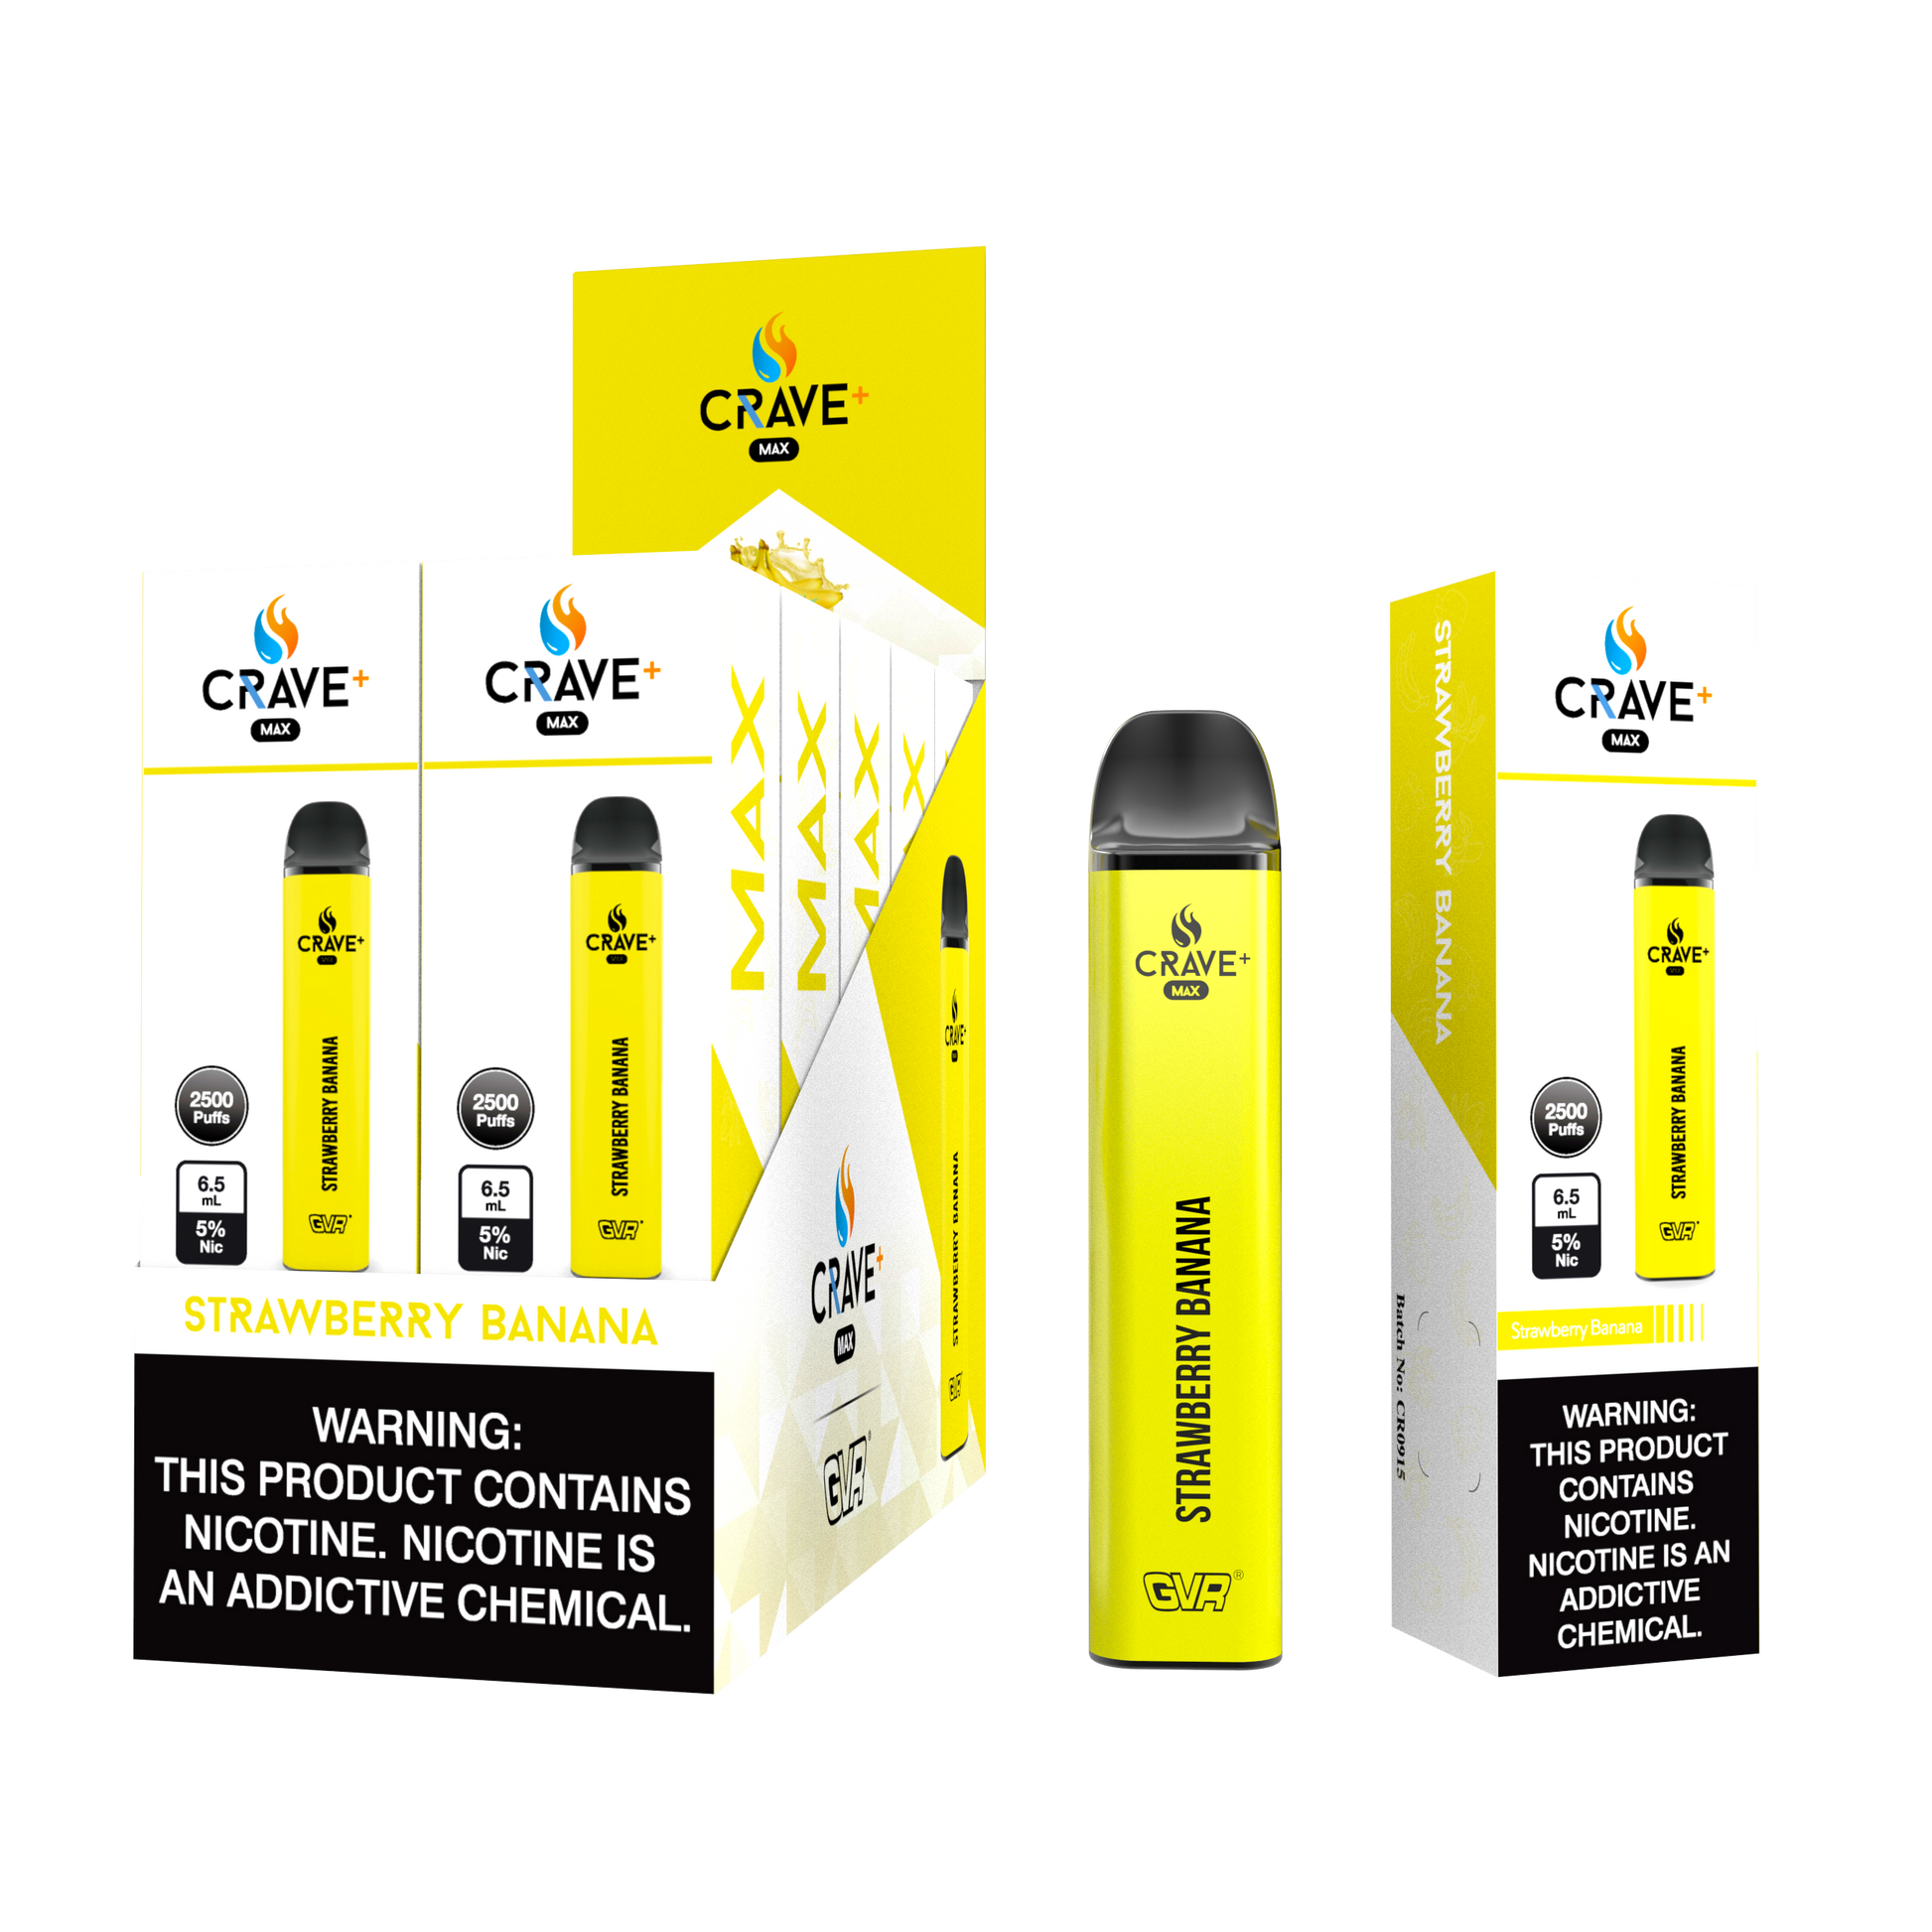 crave max, crave vape, buy crave max, crave max for sale, crave max flavors, crave flavors vape, buy crave vape online, crave max gvr, crave 2500 puffs, crave max 2500 puffs, crave strawberry banana, crave max strawberry banana, strawberry banana vape, crave banana ice, crave max banana, crave max disposable 2500 puffs,  crave max bulk, crave disposable bulk, crave max disposable